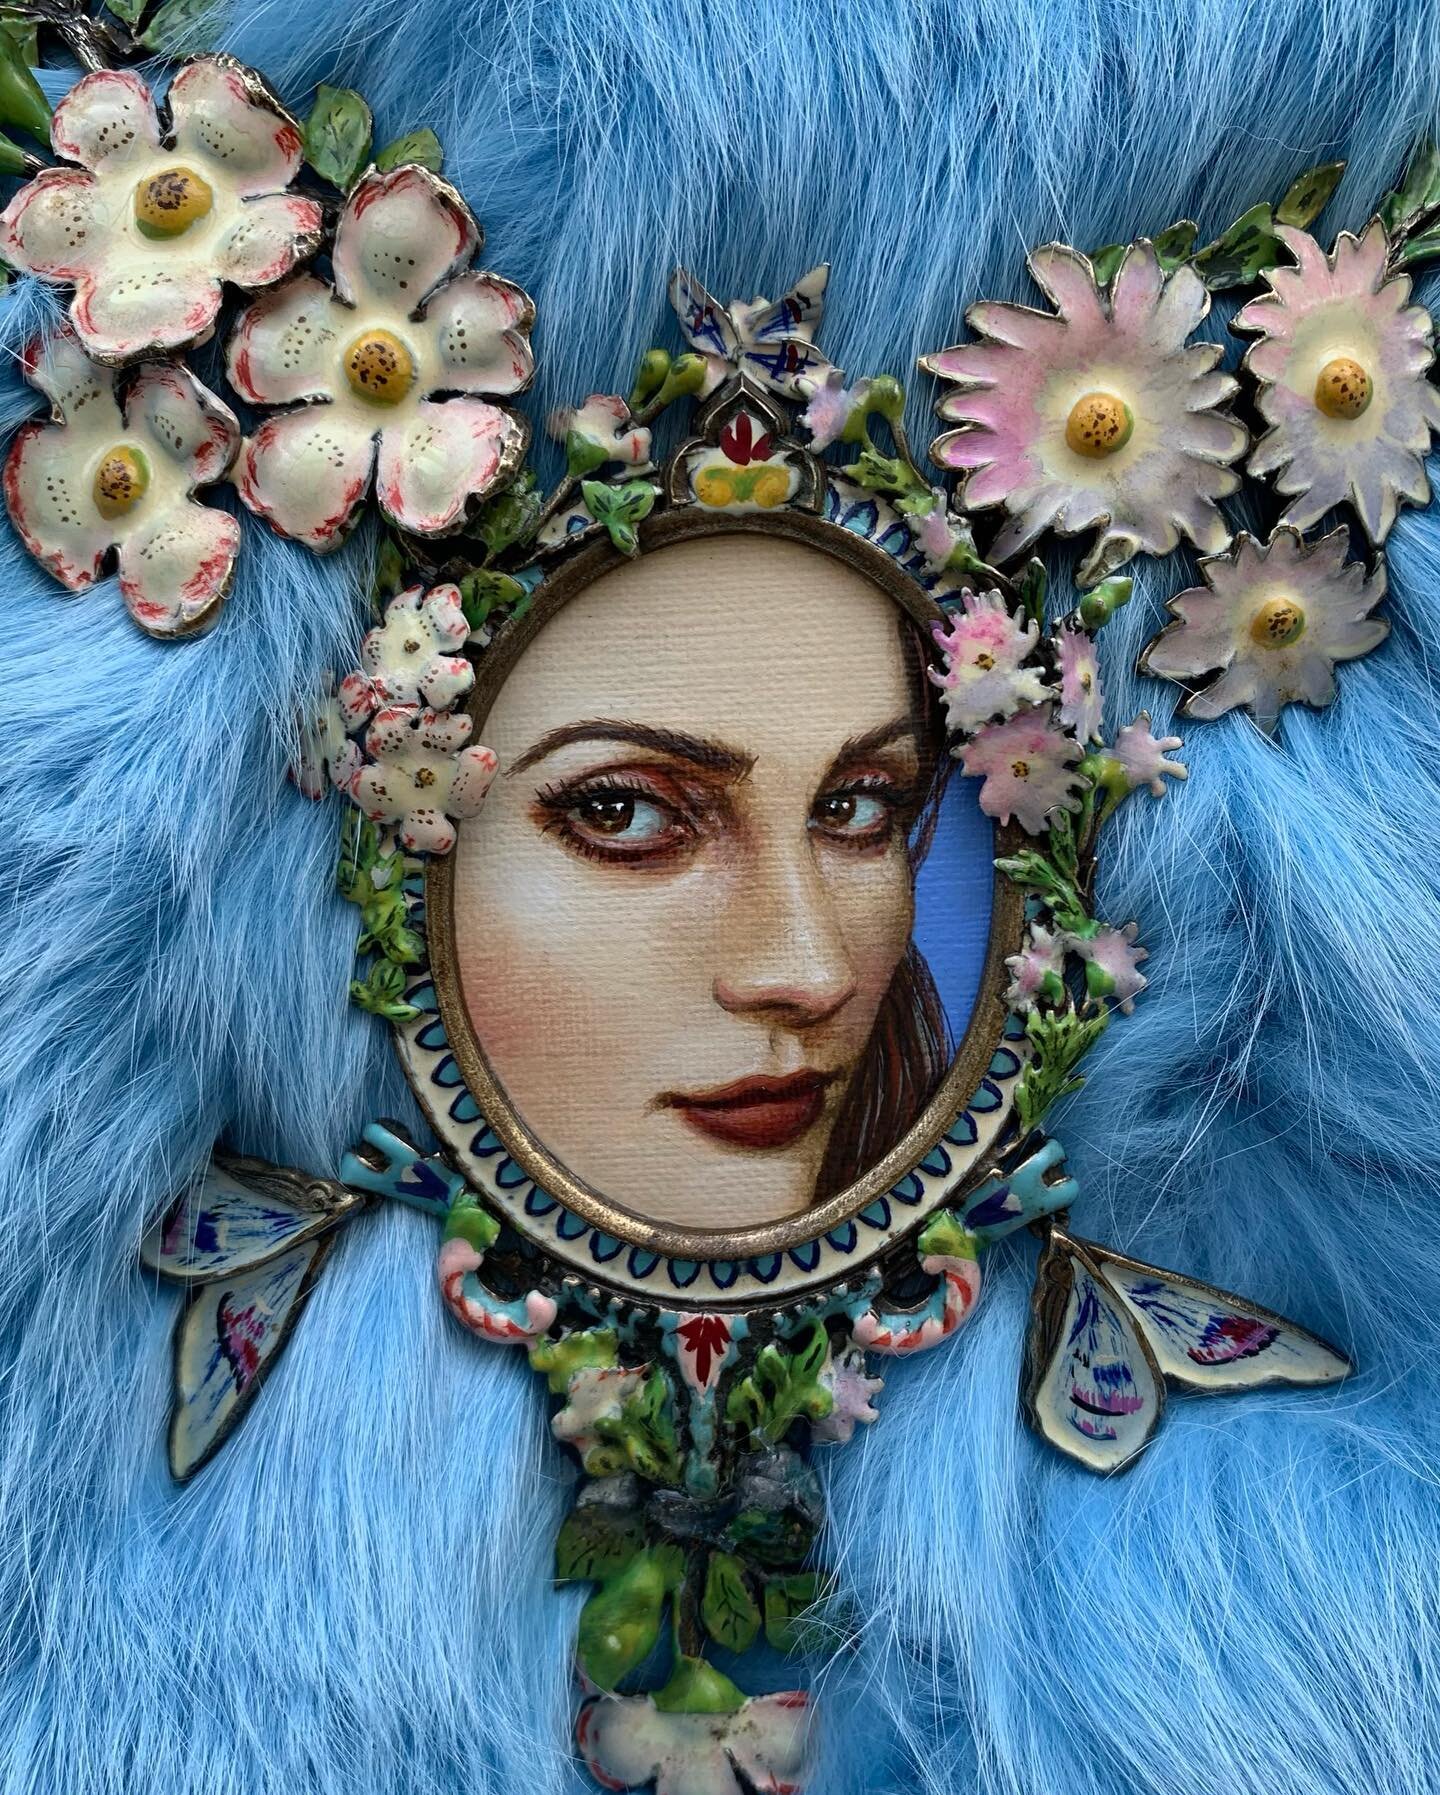 &ldquo;Janan&rdquo;

A portrait of my mother. Set inside a vintage Christian Dior frame necklace. Haute Couture by John Galliano circa early 2000&rsquo;s. Enameled fauna and clipped butterfly wings adorn the frame with decorative floral motifs. Paint